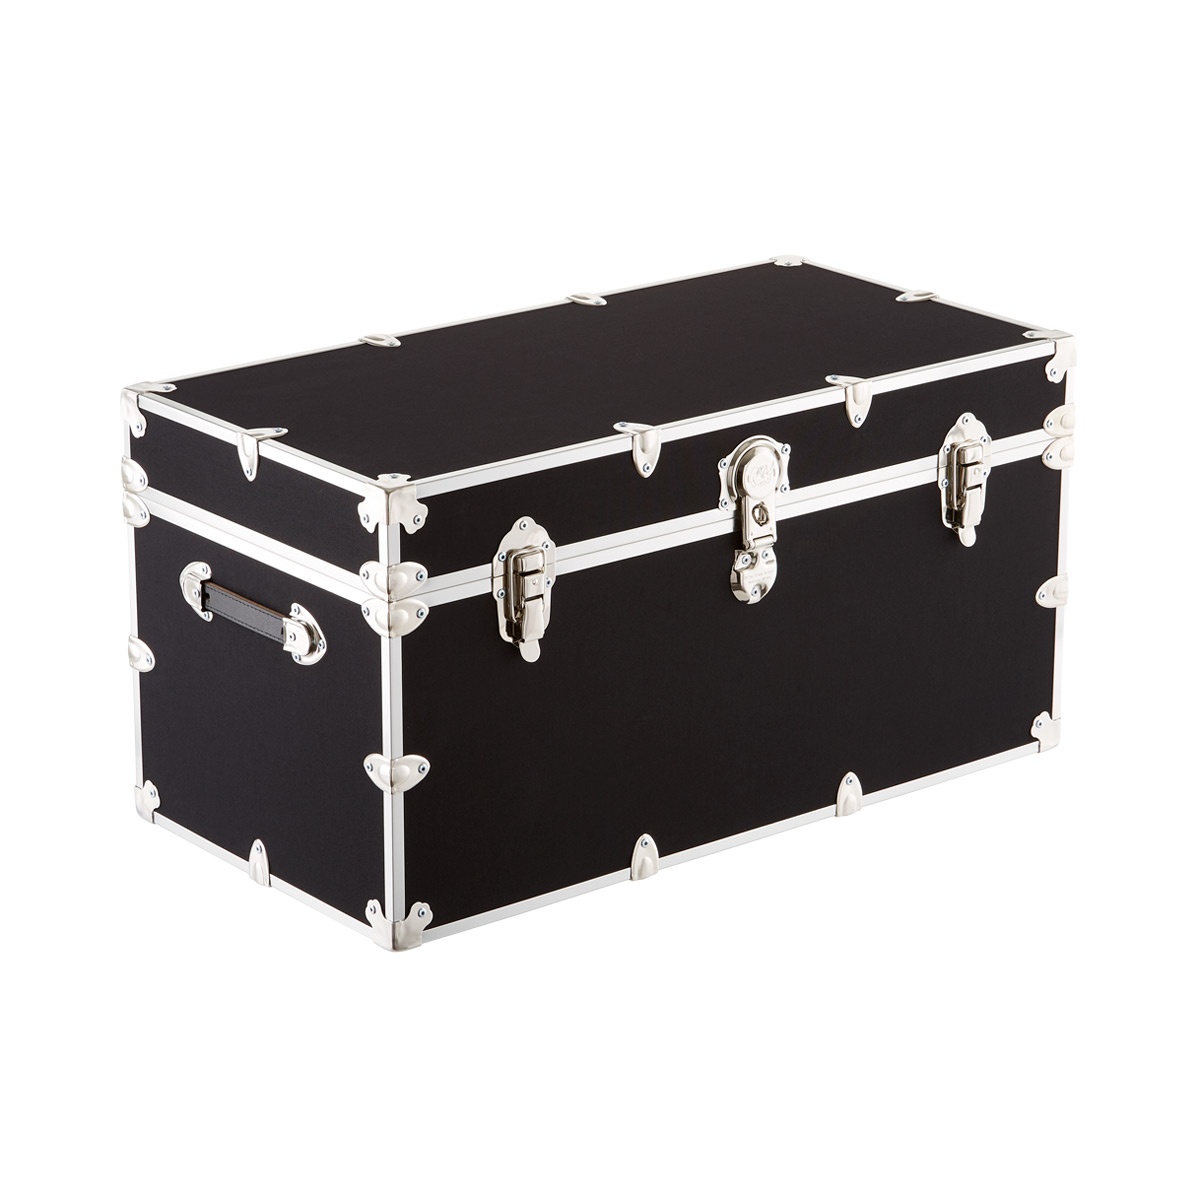 https://www.containerstore.com/catalogimages/321607/10071783-Deluxe-Locking-Rolling-Stor.jpg